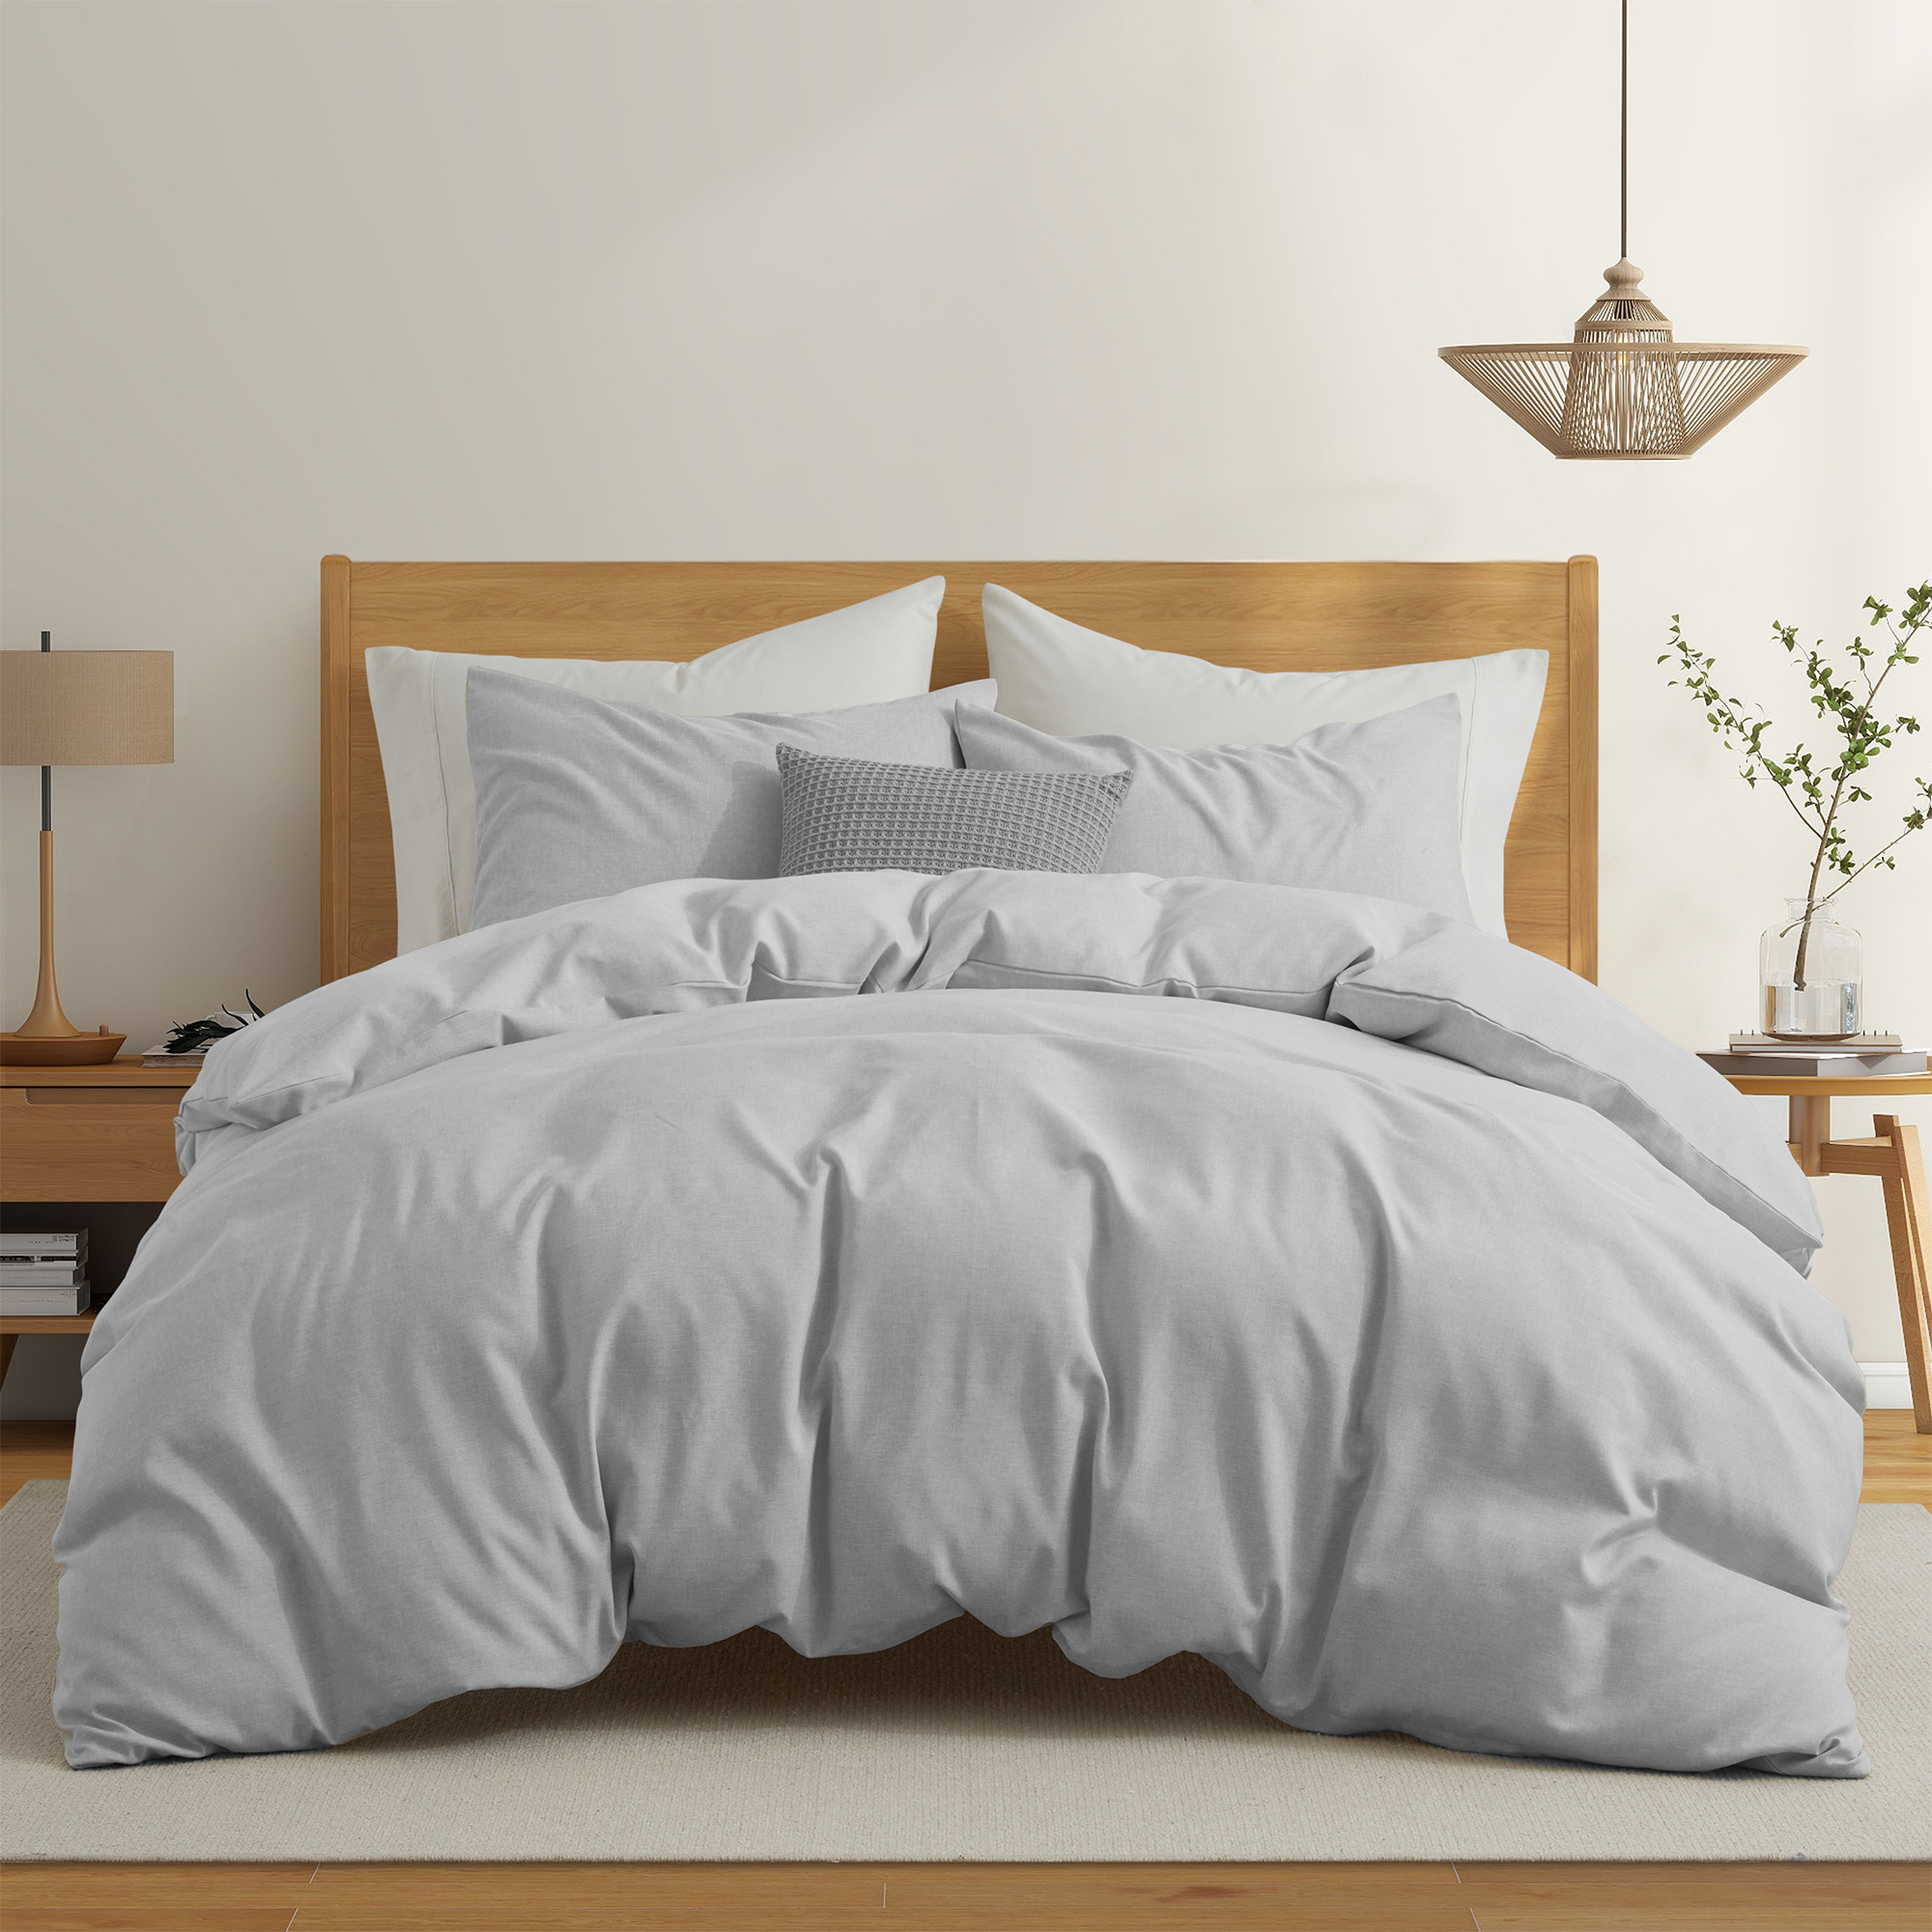 Solid Faux Linen Duvet Cover Set With Shams - Luxurious Comfort - Gray, Full/Queen-90x90